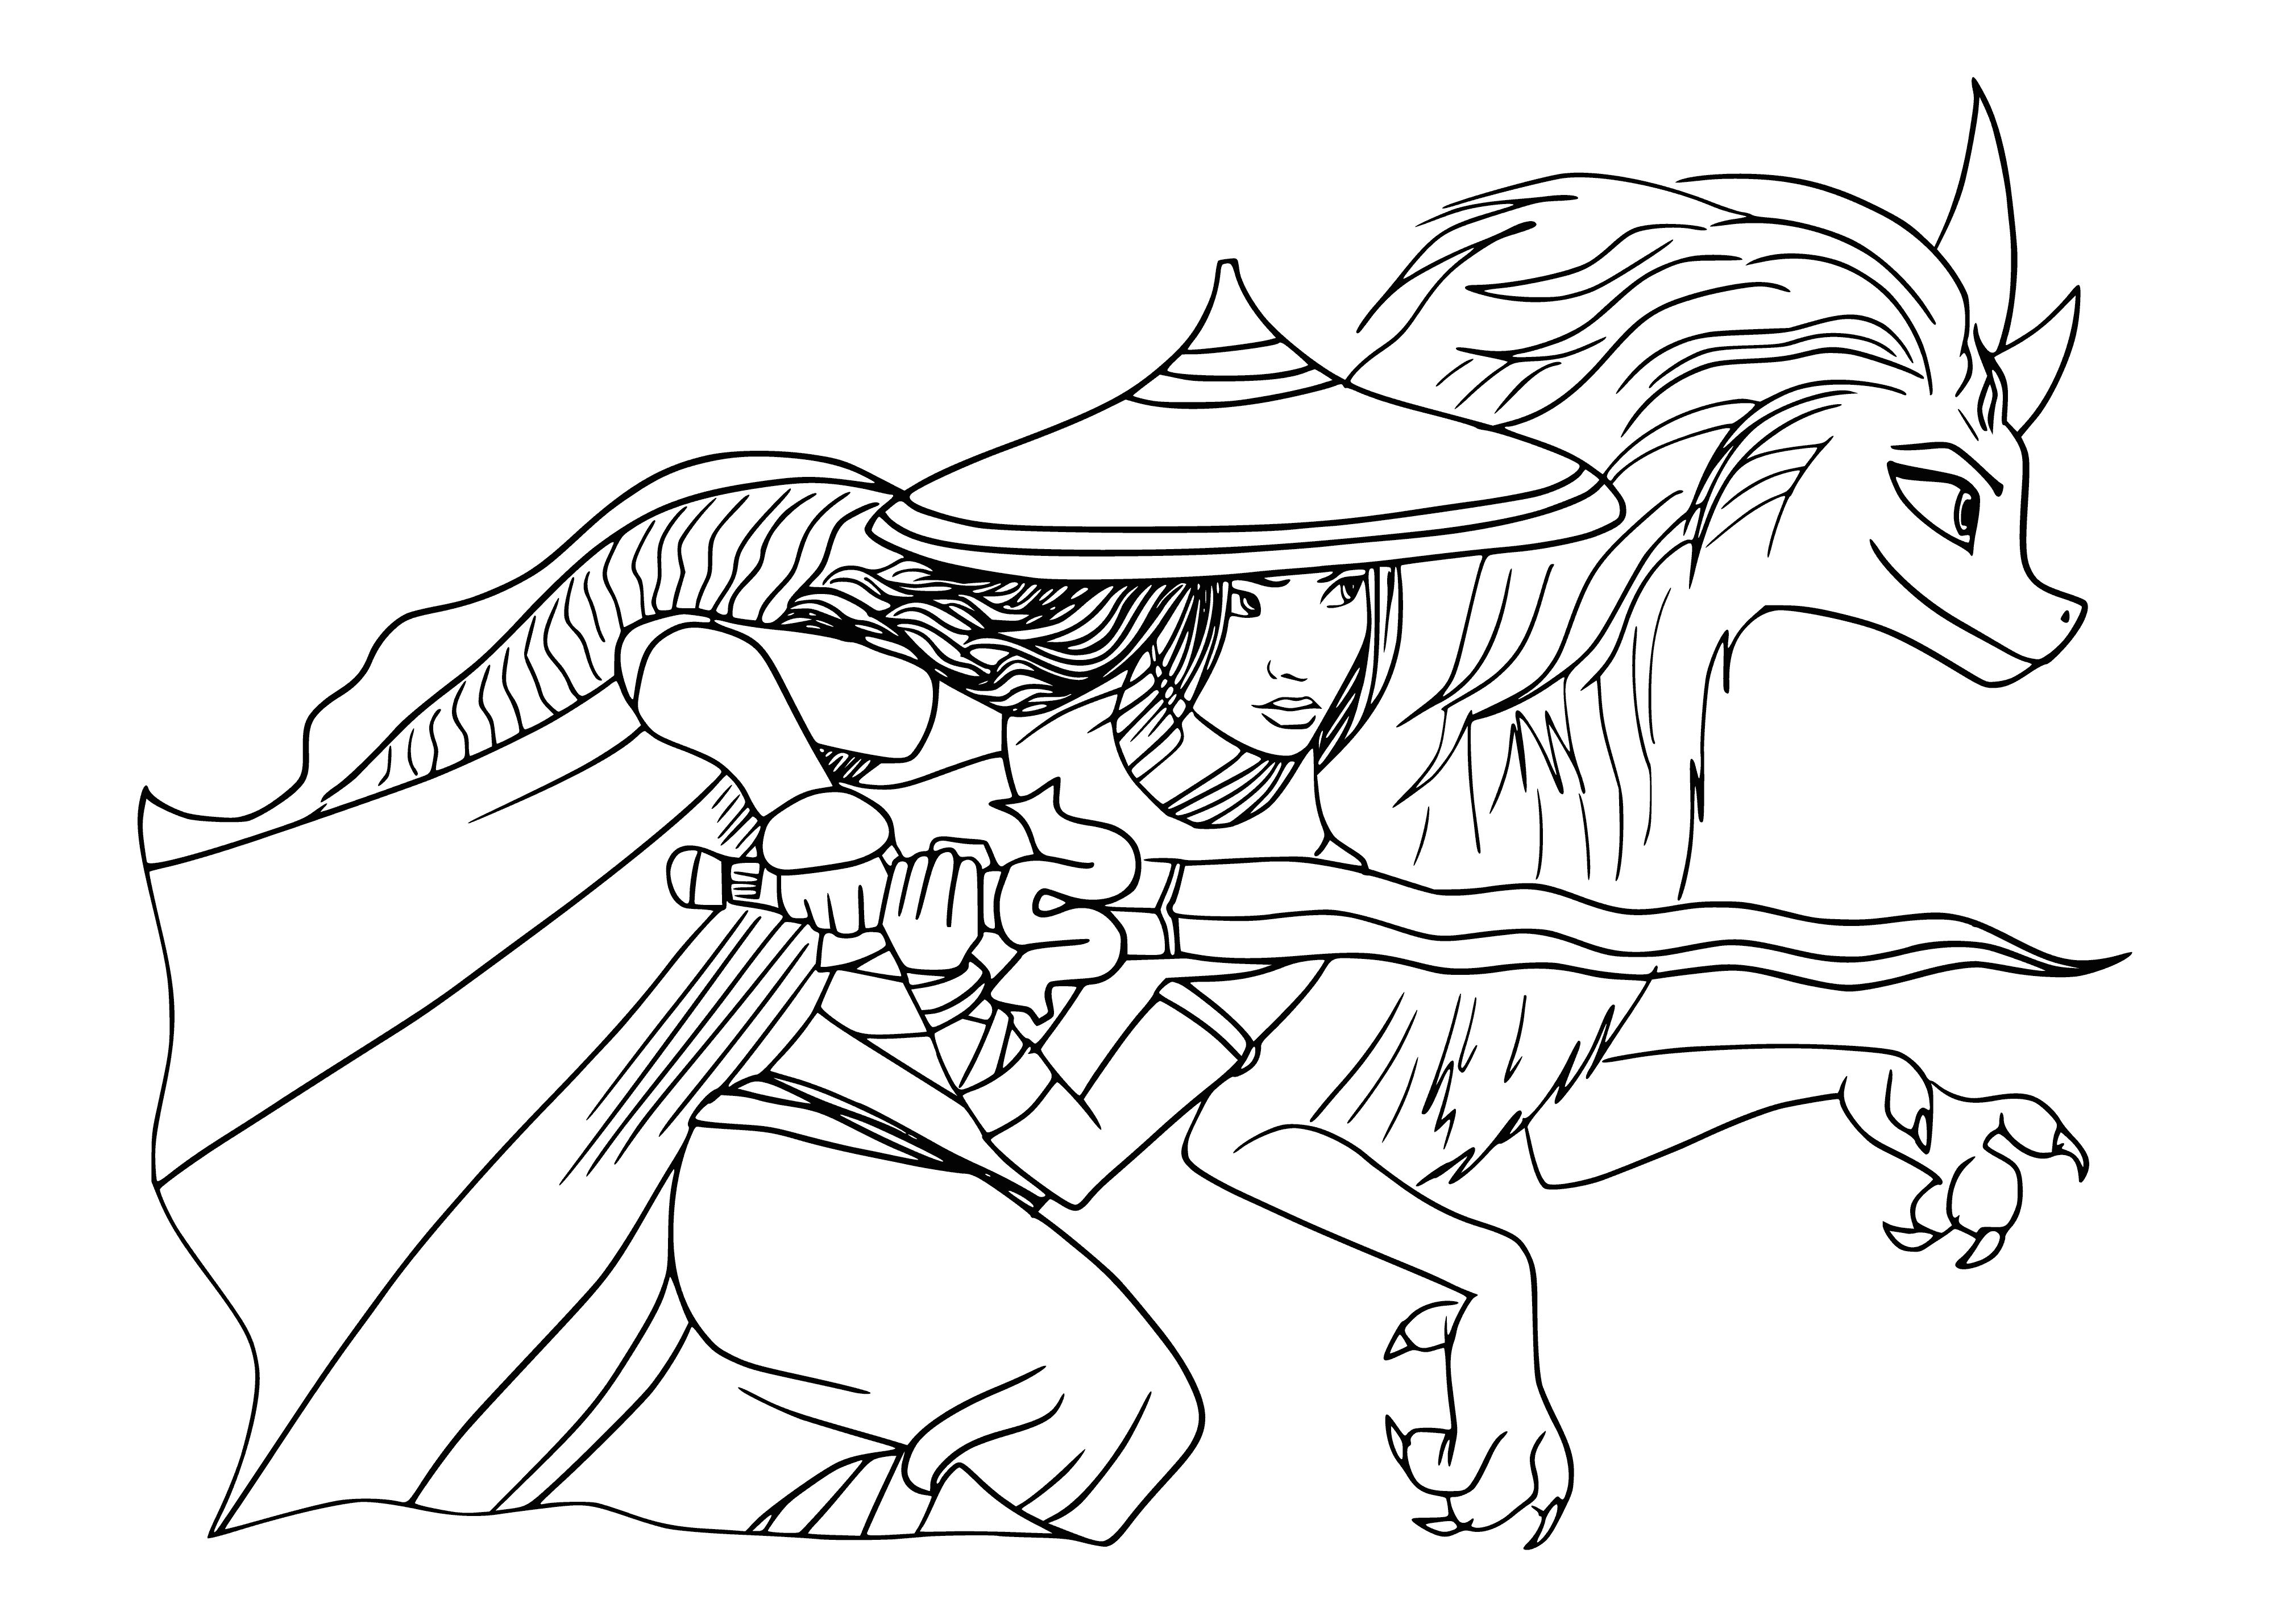 coloring page: Raya stands in the forest ready to face off with the large, purple-scaled dragon Shisu, armed with sword and shield. Determined and armored, she faces her foe.